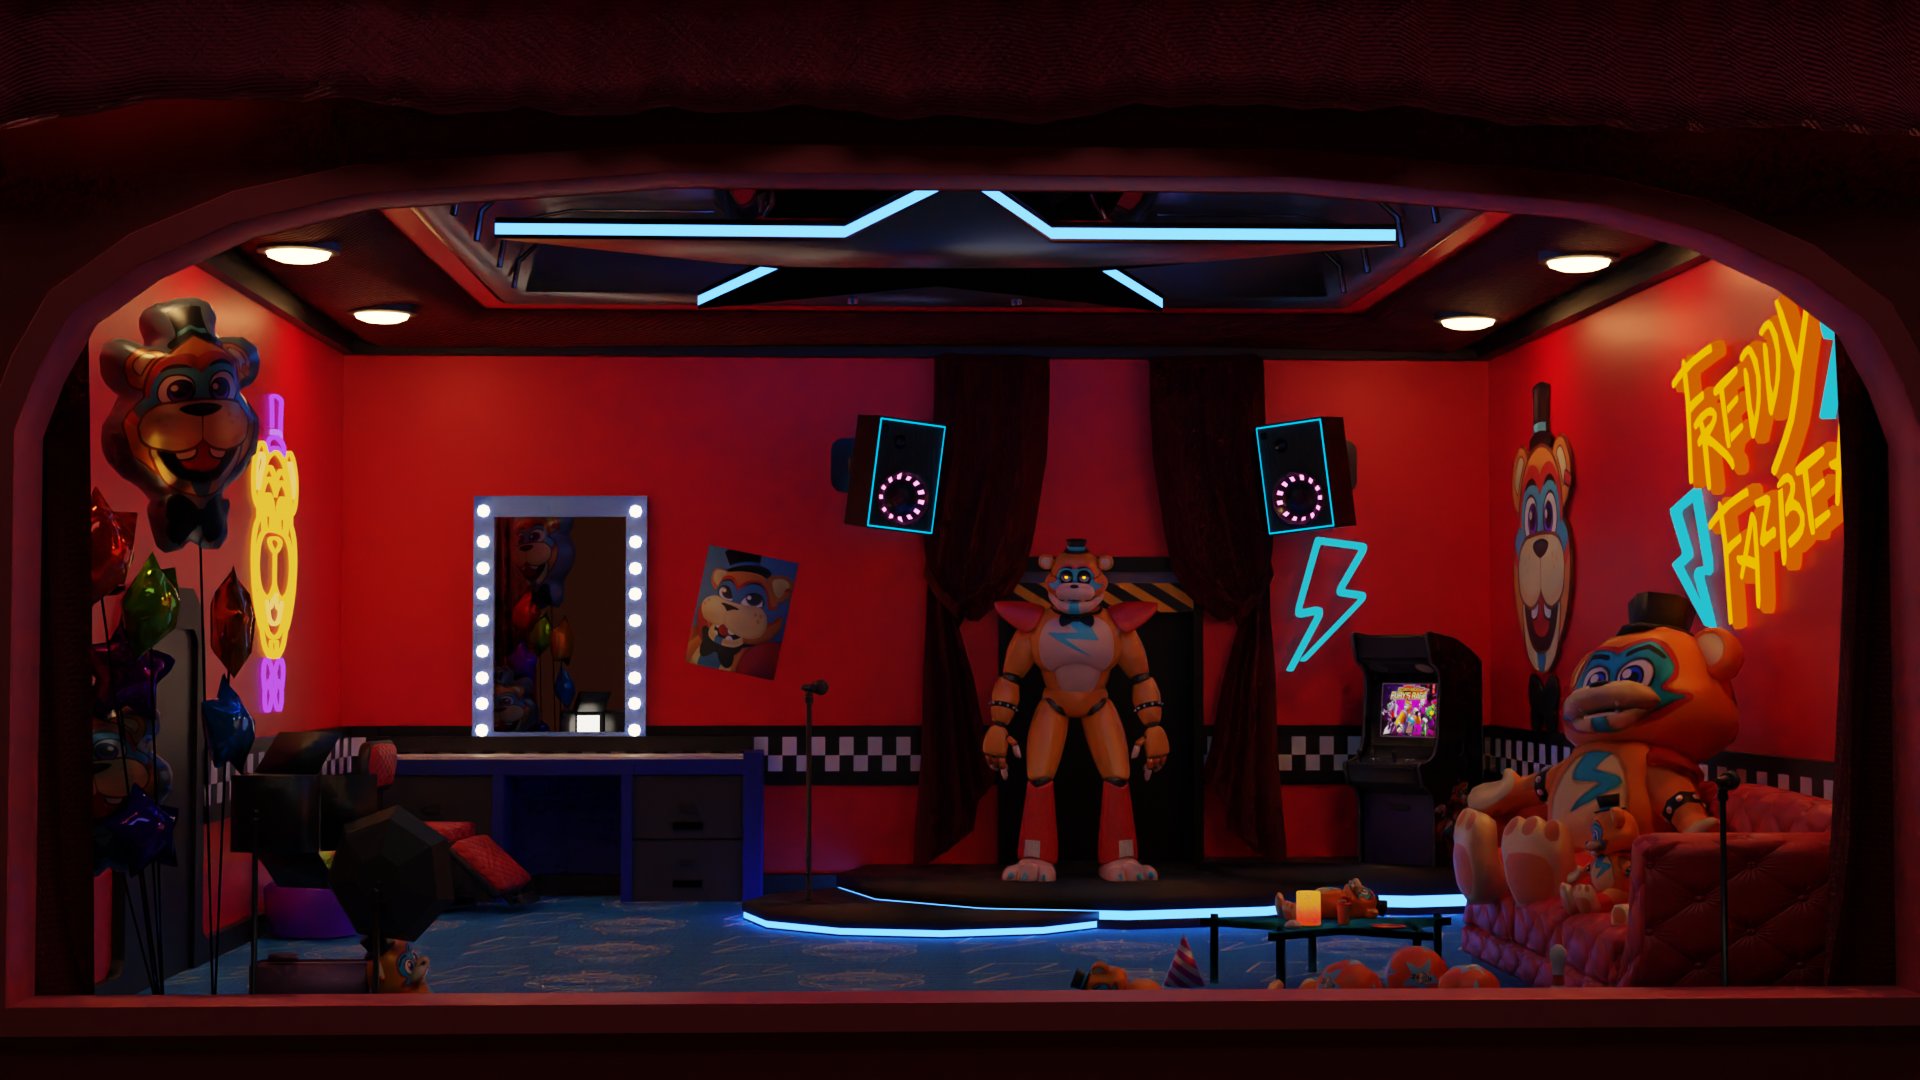 Acid_Love on X: Fnaf sb animatronic rooms are pretty much done